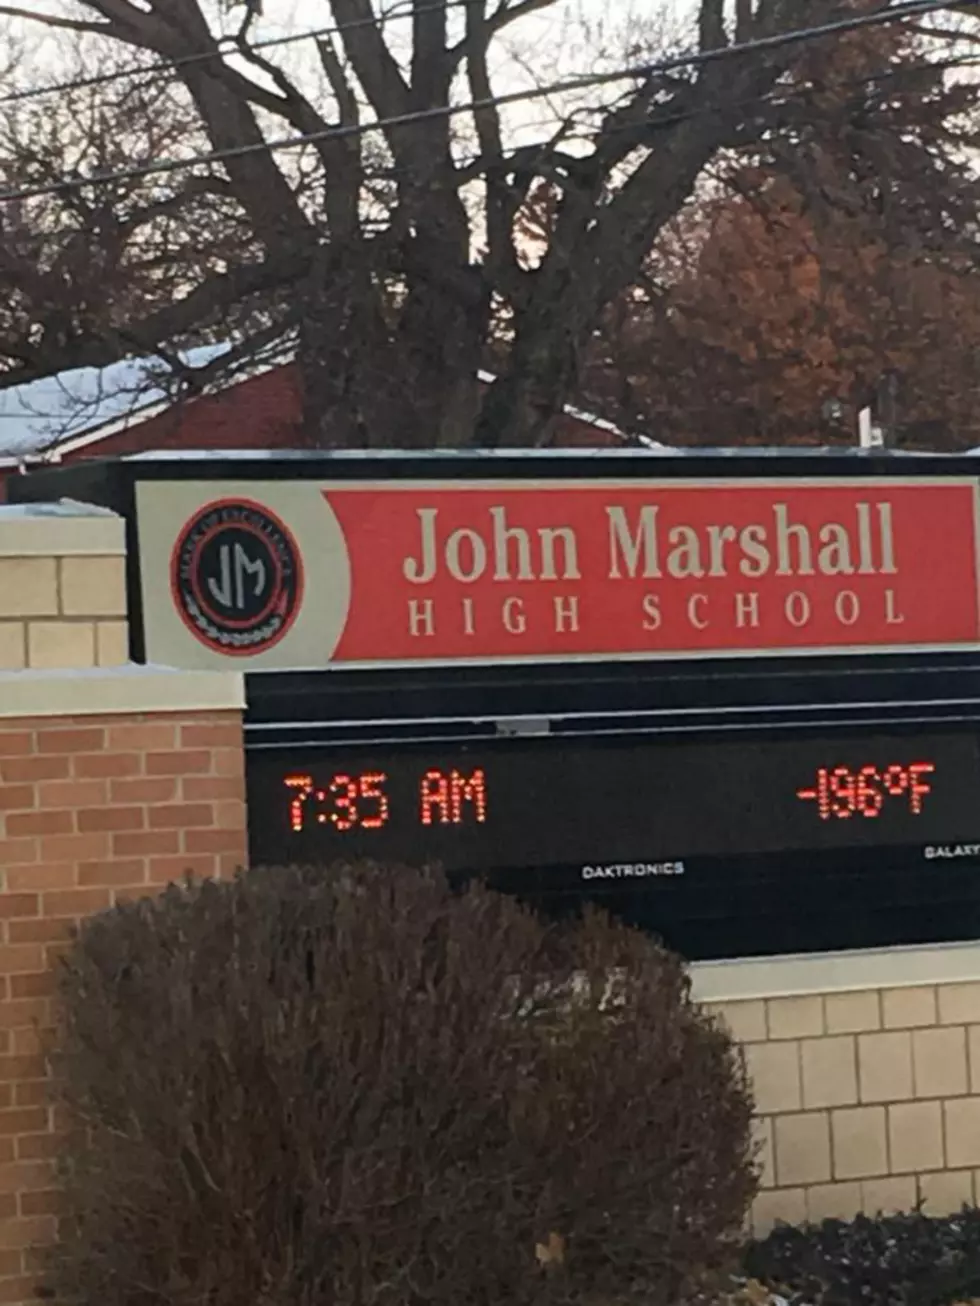 The JM Sign Got Extra When It Came To The Weather